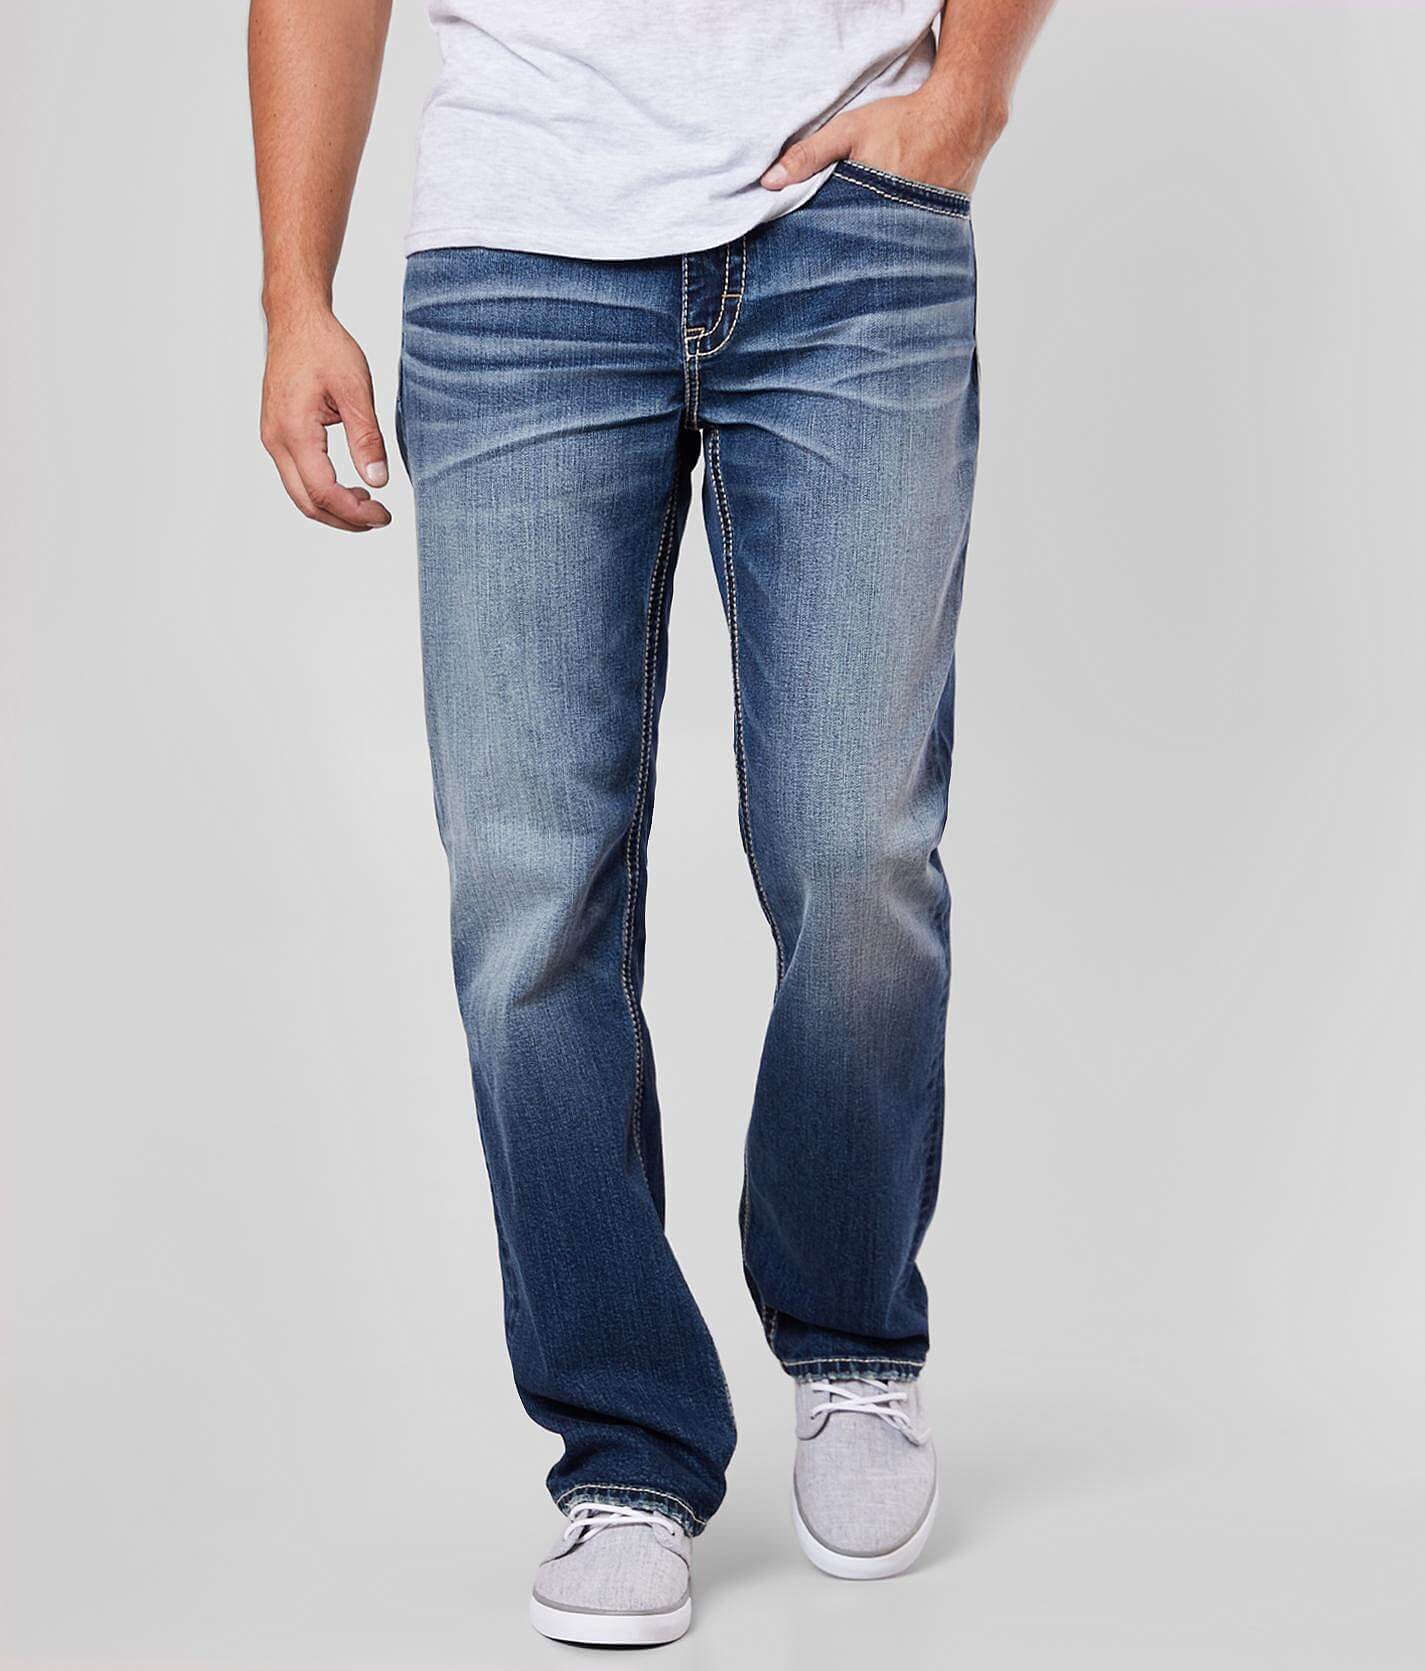 s oliver bootcut jeans